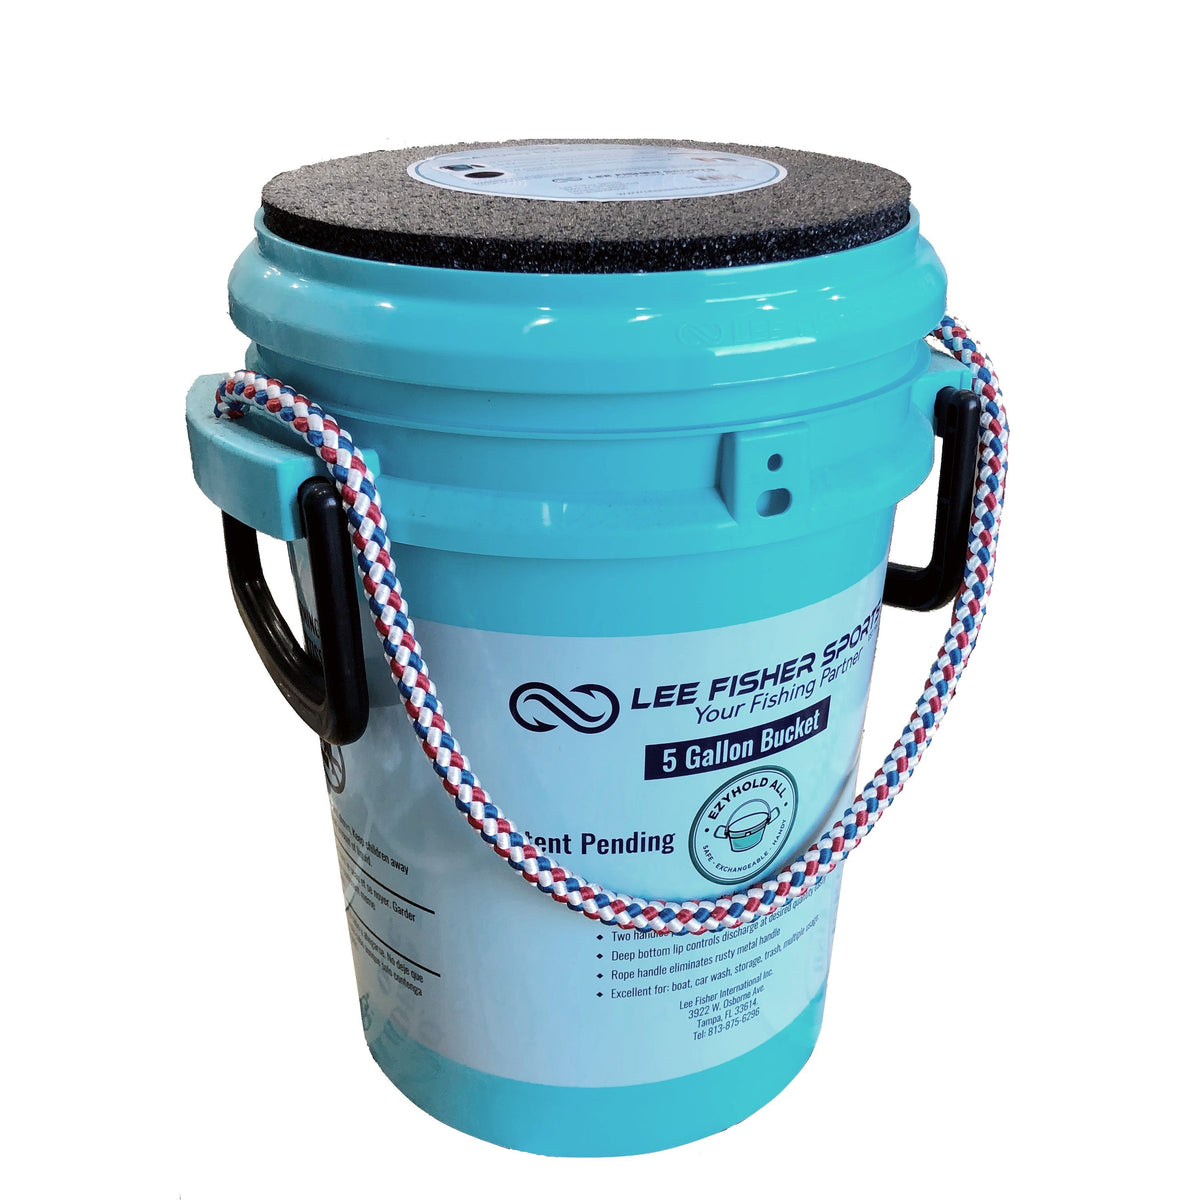 Padded Thick Foam Bucket Seat Comes with 5 Gallon Bucket | Everstrong Rope